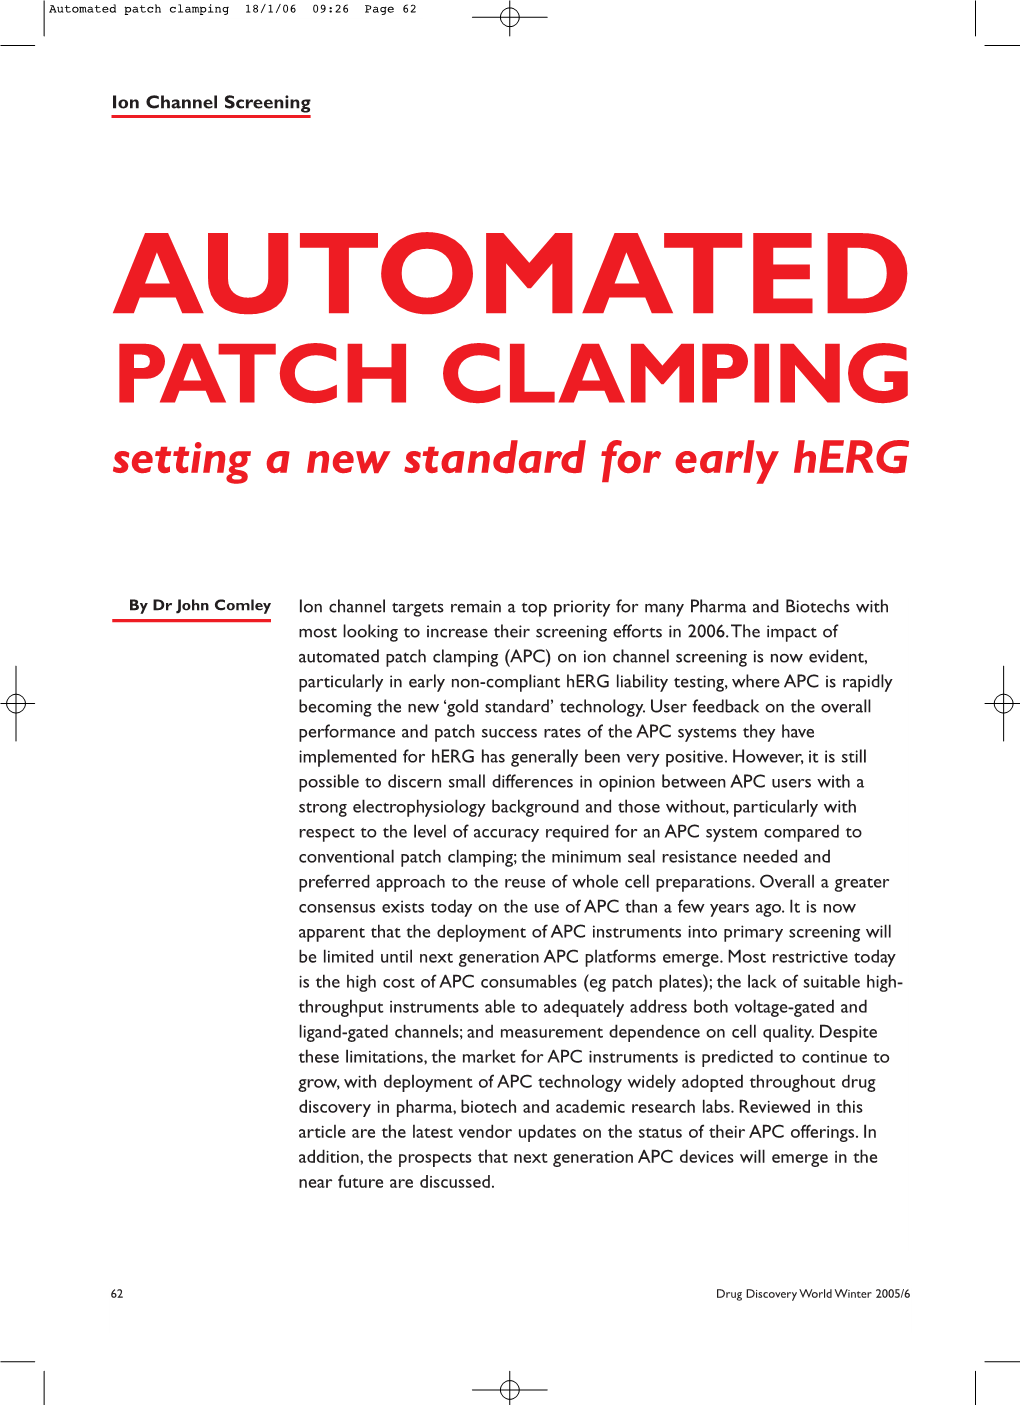 Automated Patch Clamping 18/1/06 09:26 Page 62